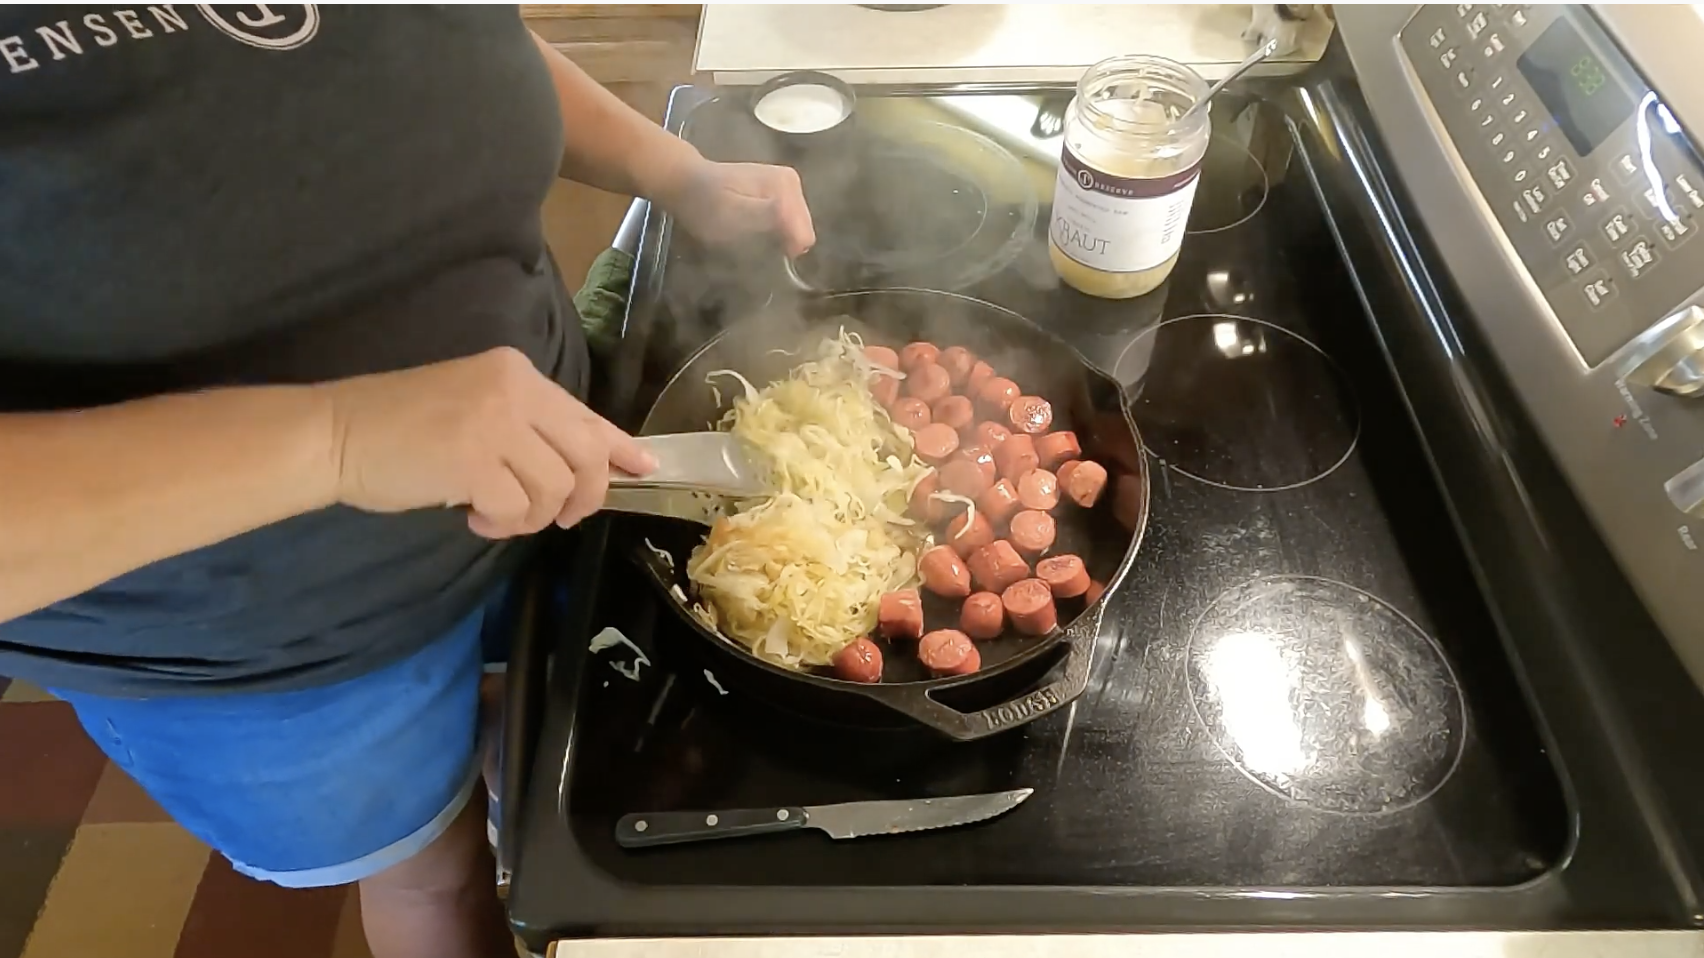 Sauerkraut and hot dogs cooking in a pan